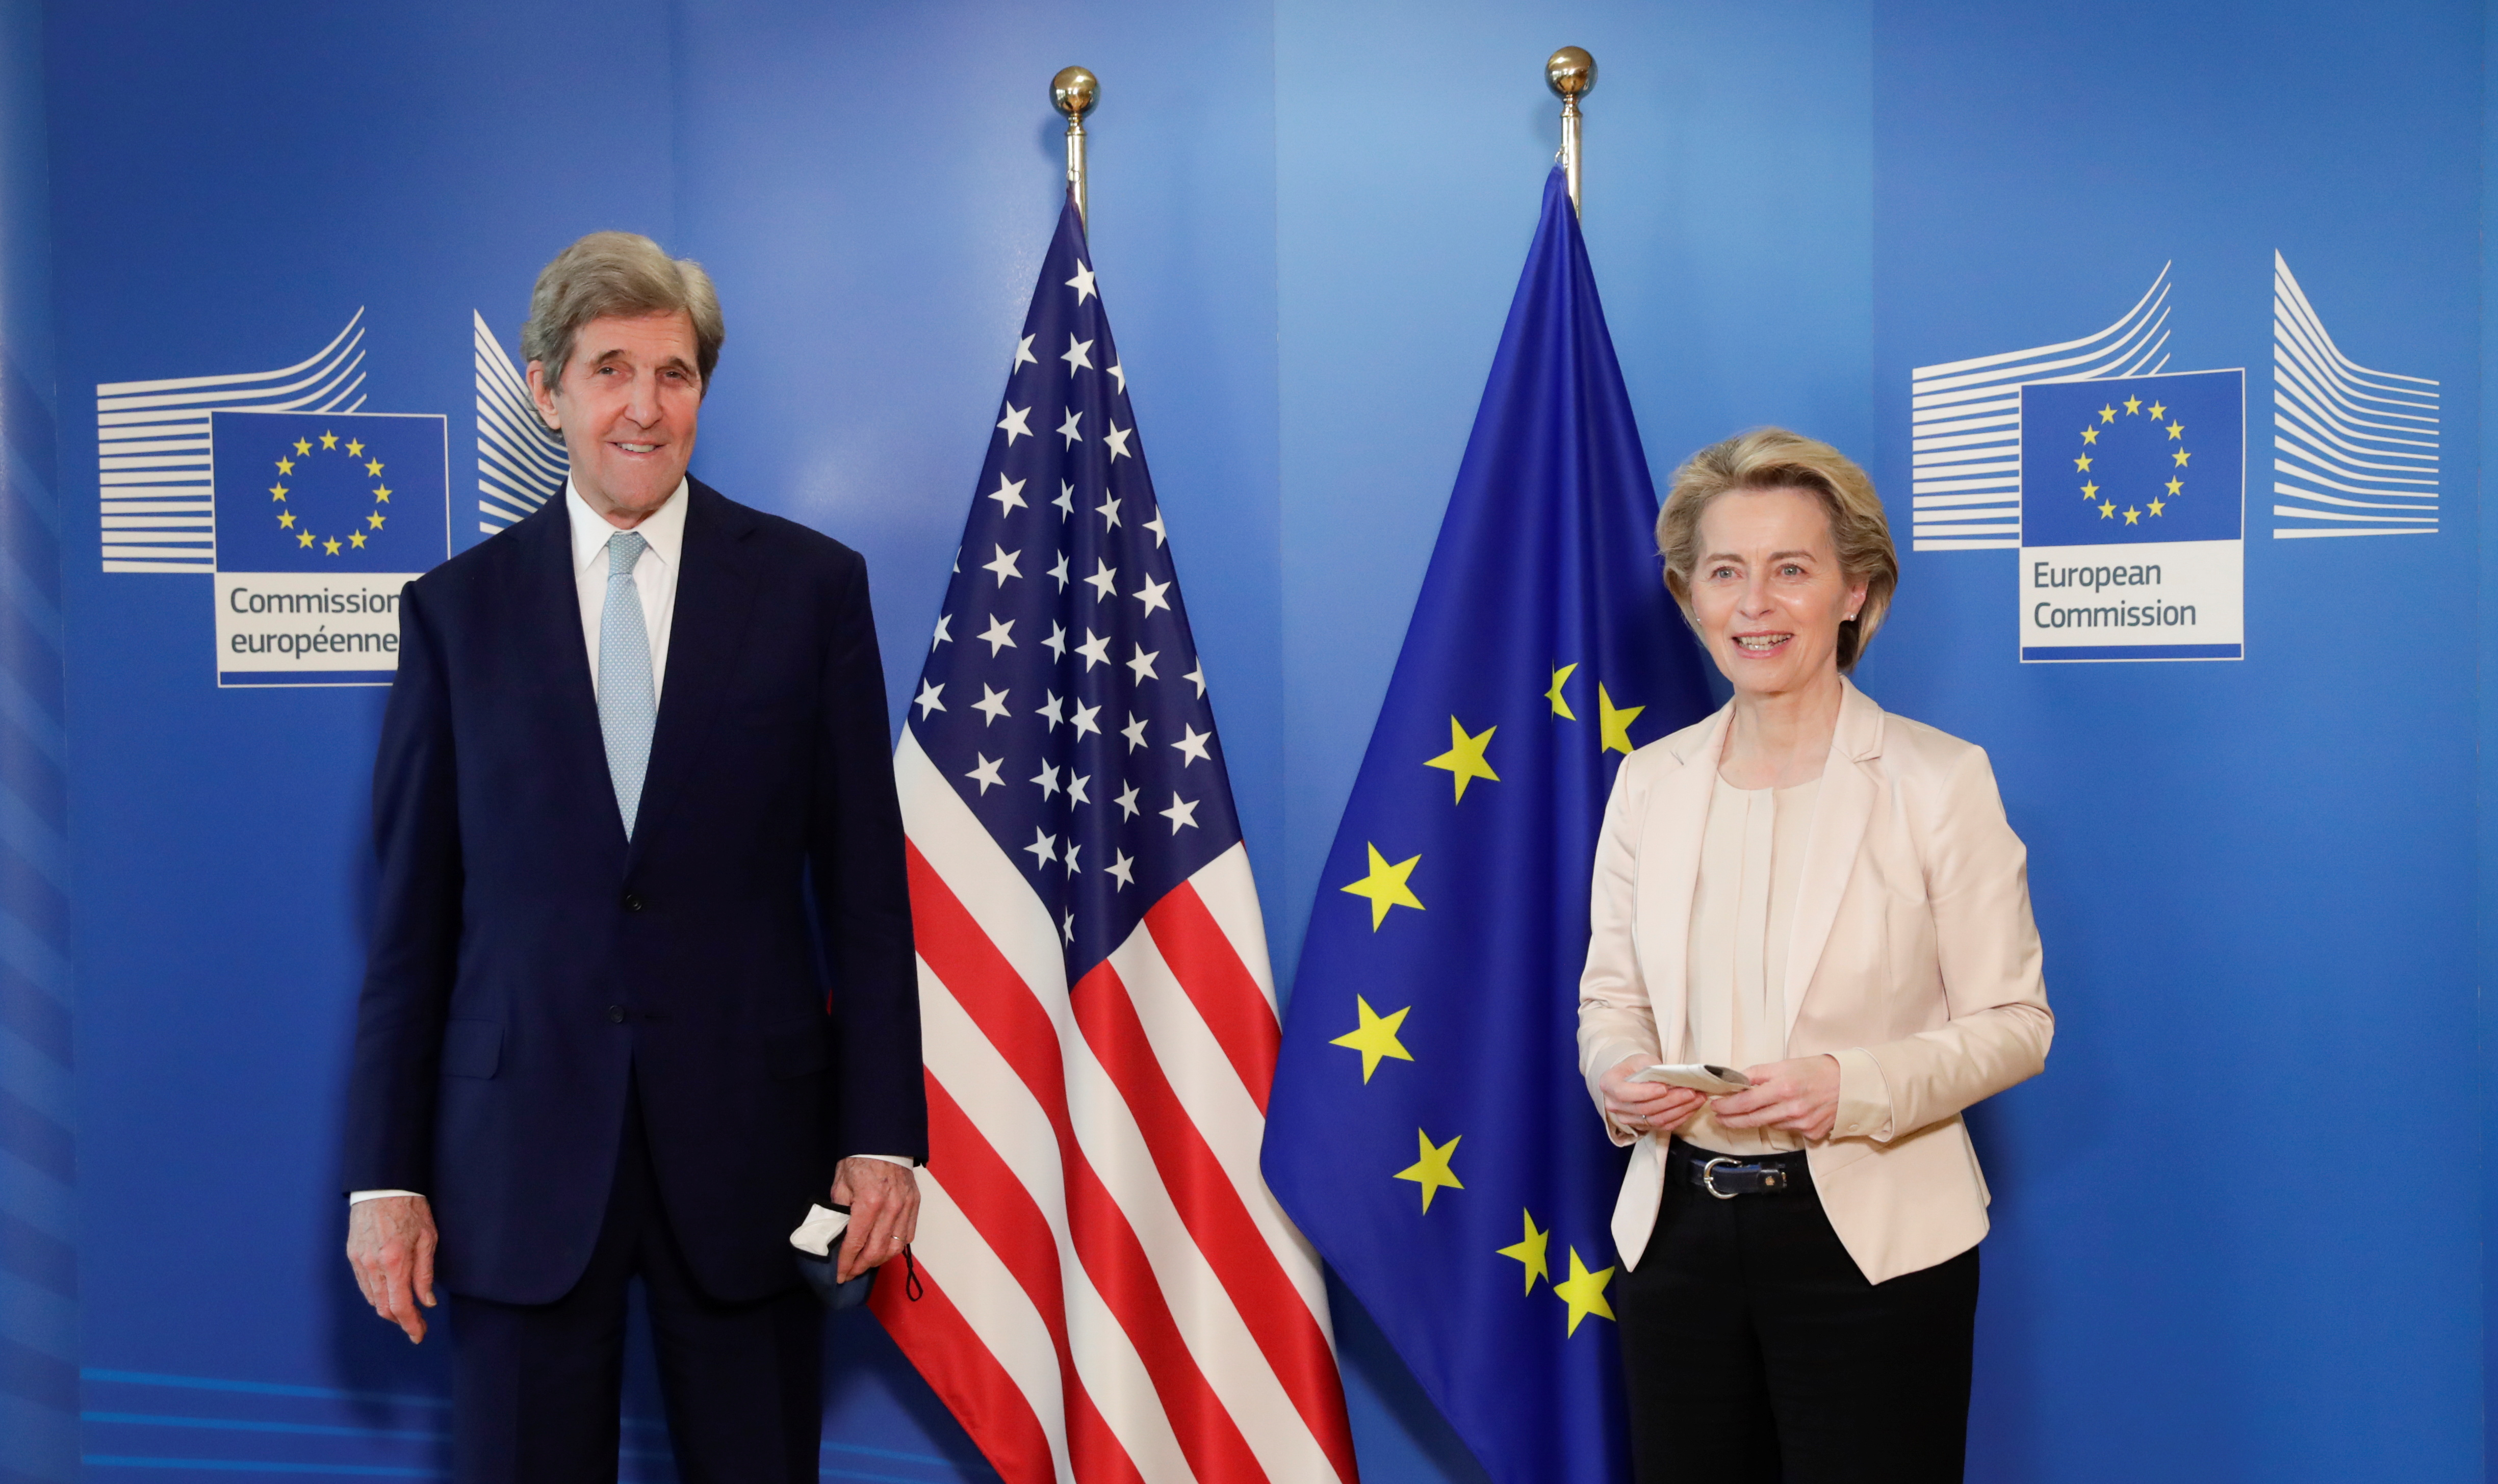 EU Commission visit of US Special Presidential Envoy for Climate John Kerry